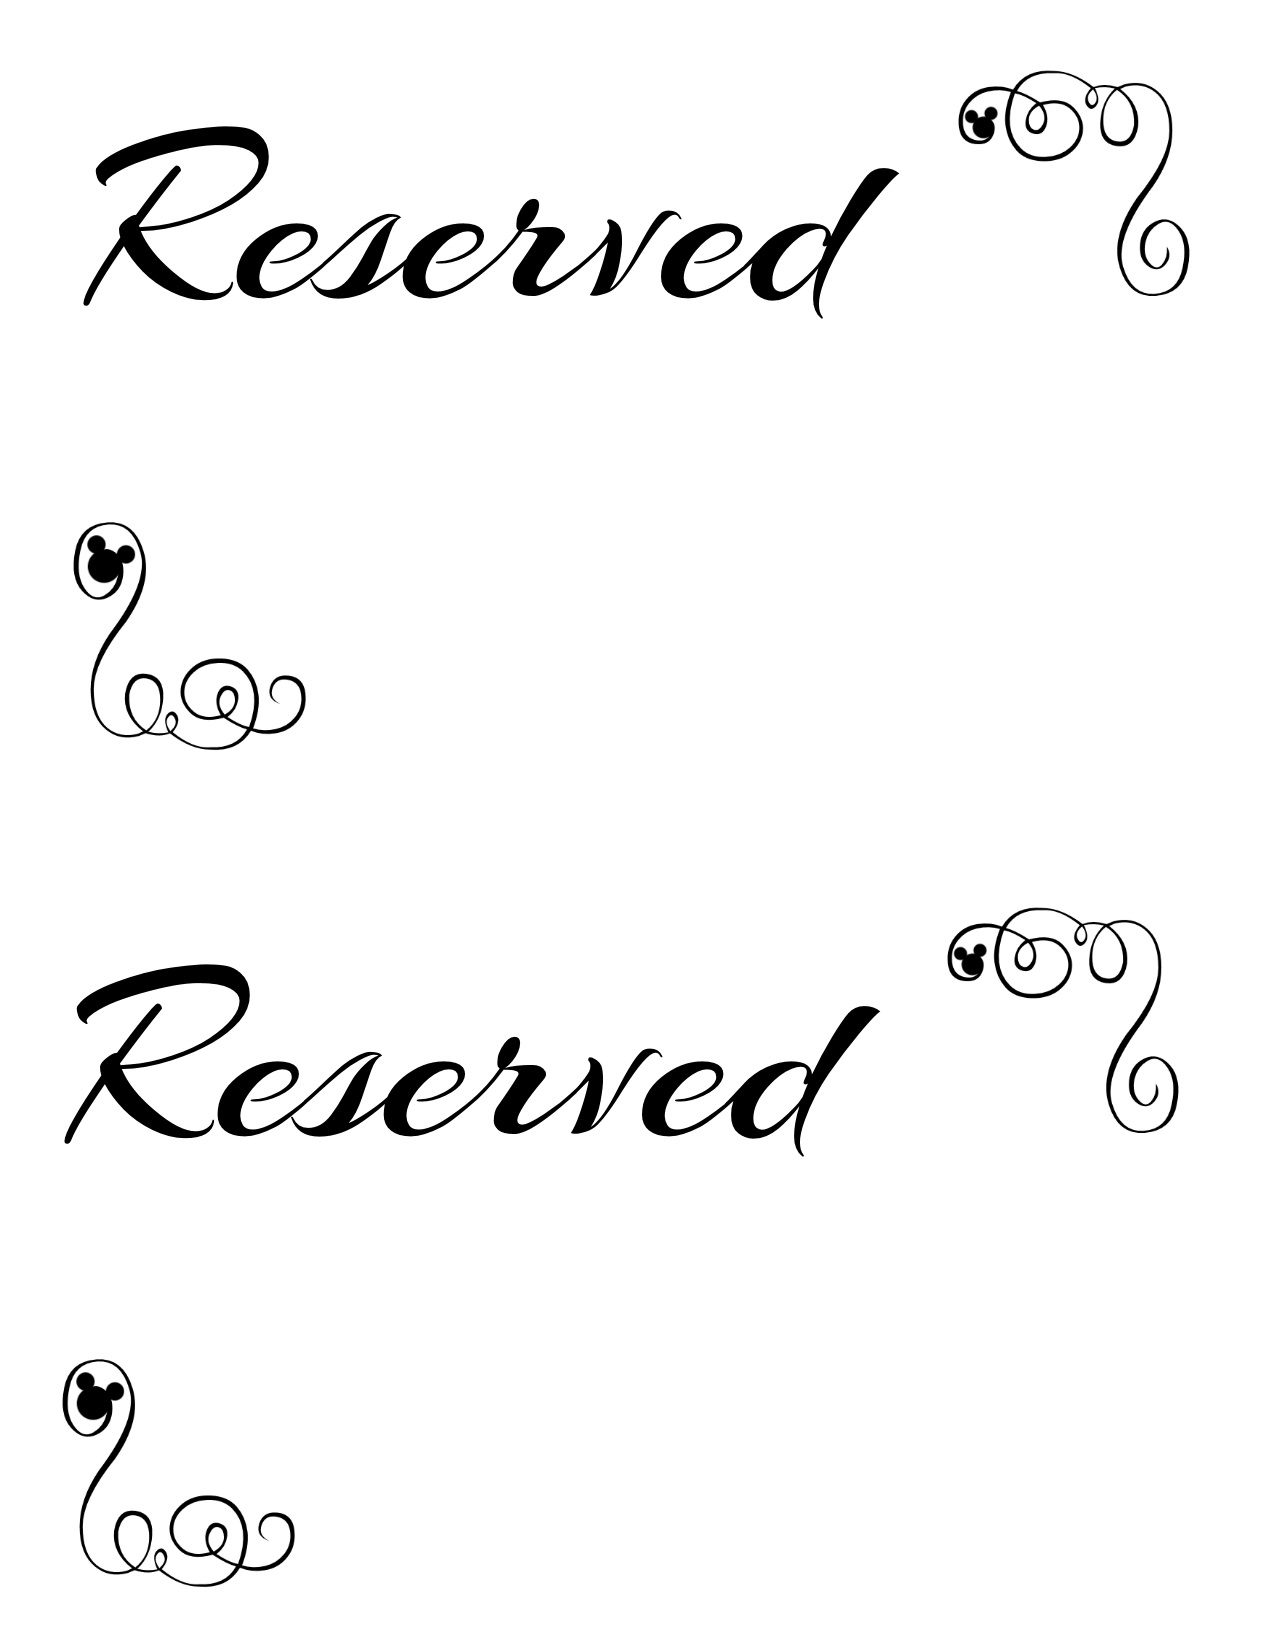 Free Printable Reserved Seating Signs for Your Wedding Ceremony